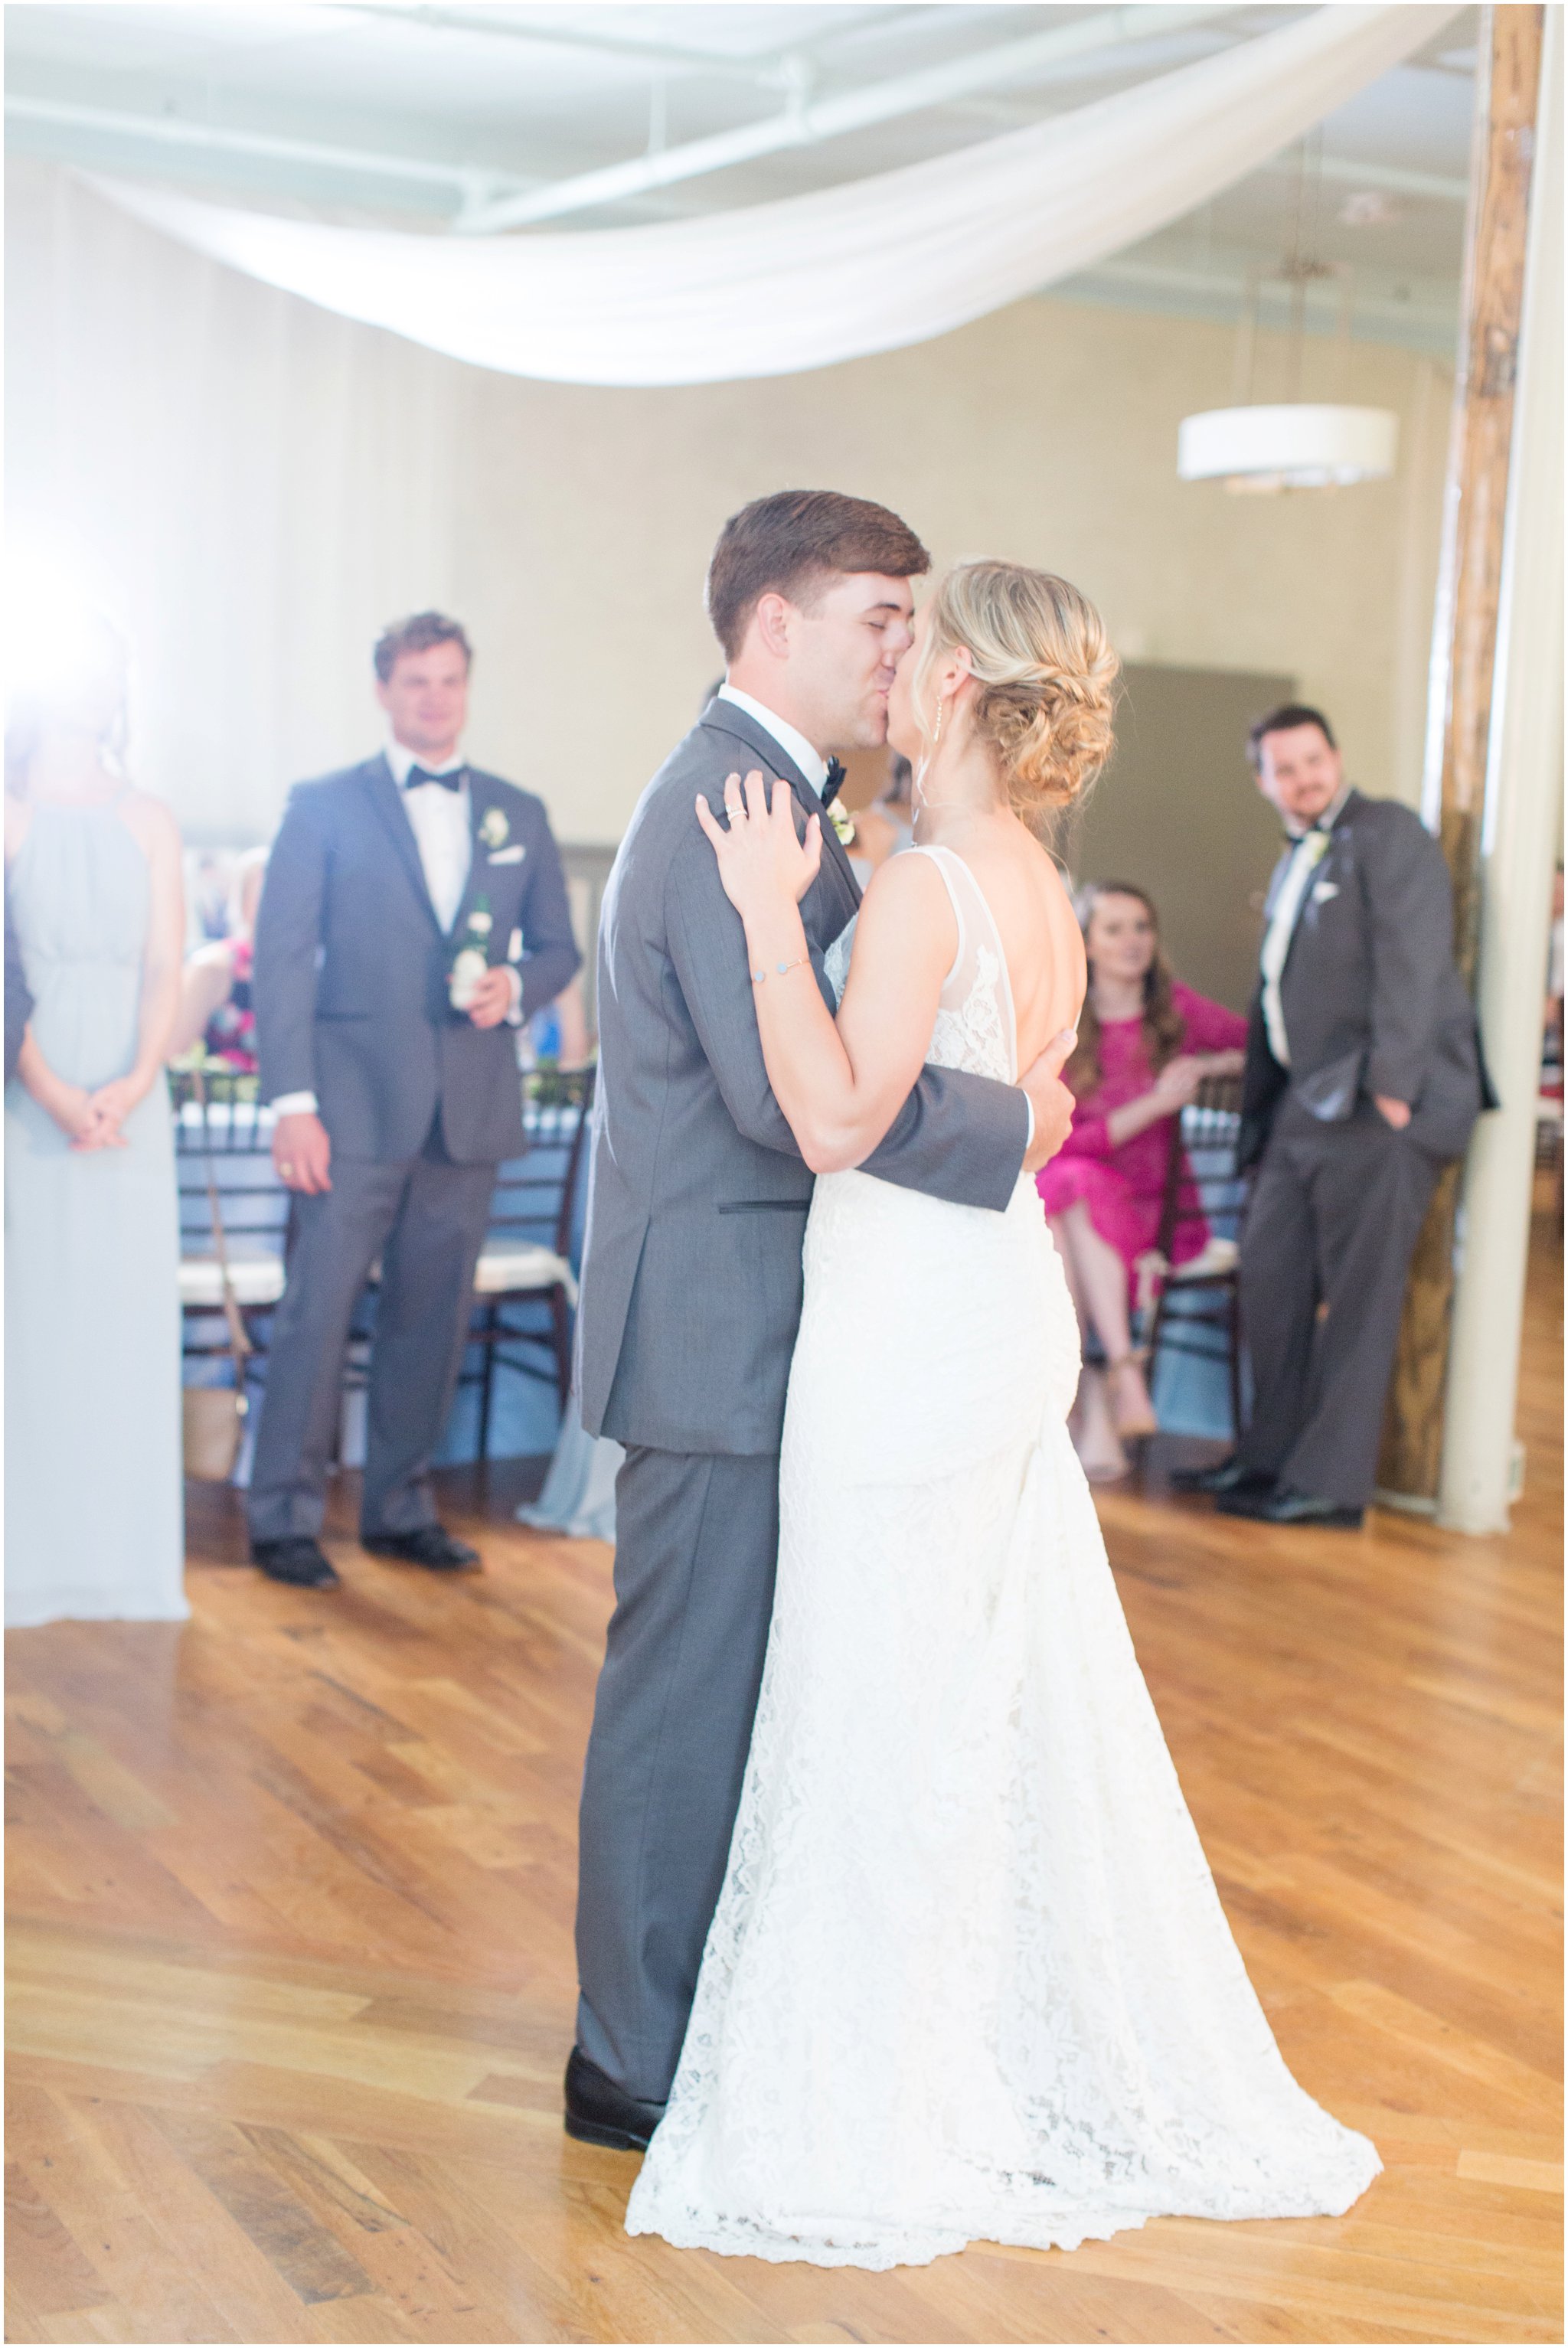 How to Photograph the Reception | How to use Off-Camera-Flash | Christa Rene Photography